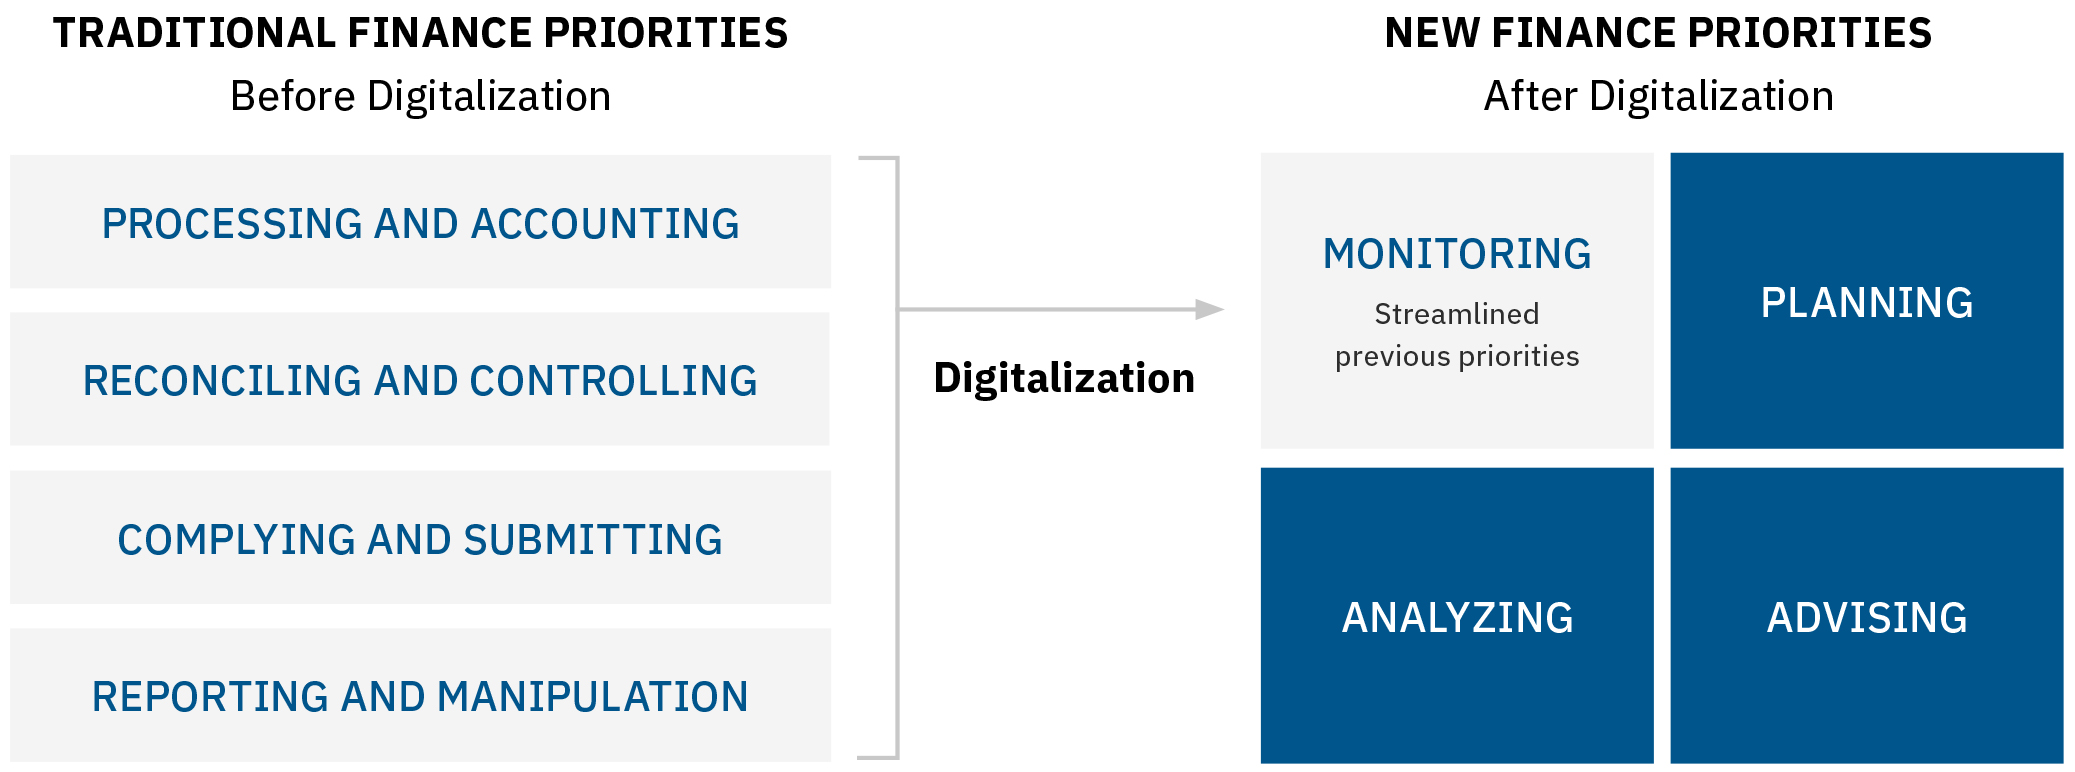 Four boxes on the left show traditional finance priorities including processing and accounting, reconciling and controlling, complying and submitting, and reporting and manipulation. An arrow going from these four boxes to one box on the right labeled "monitoring" indicates how these priorities have been streamlined via digitalization. Three other boxes on the right-hand side of the graphic round out the new finance priorities. They include additional strategic tasks: planning, analyzing, and advising.